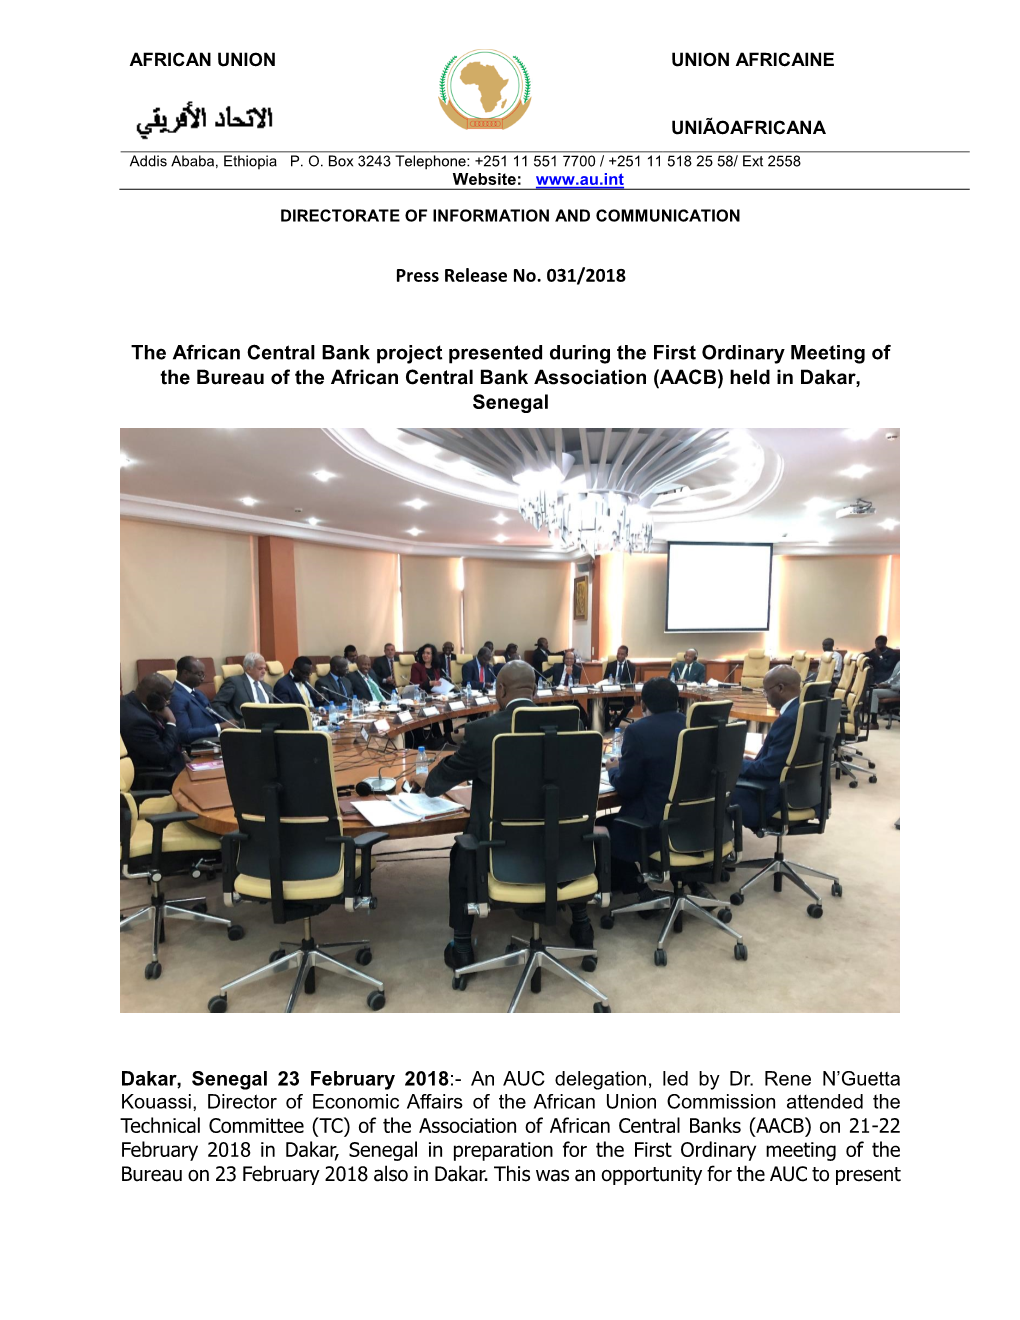 Press Release No. 031/2018 the African Central Bank Project